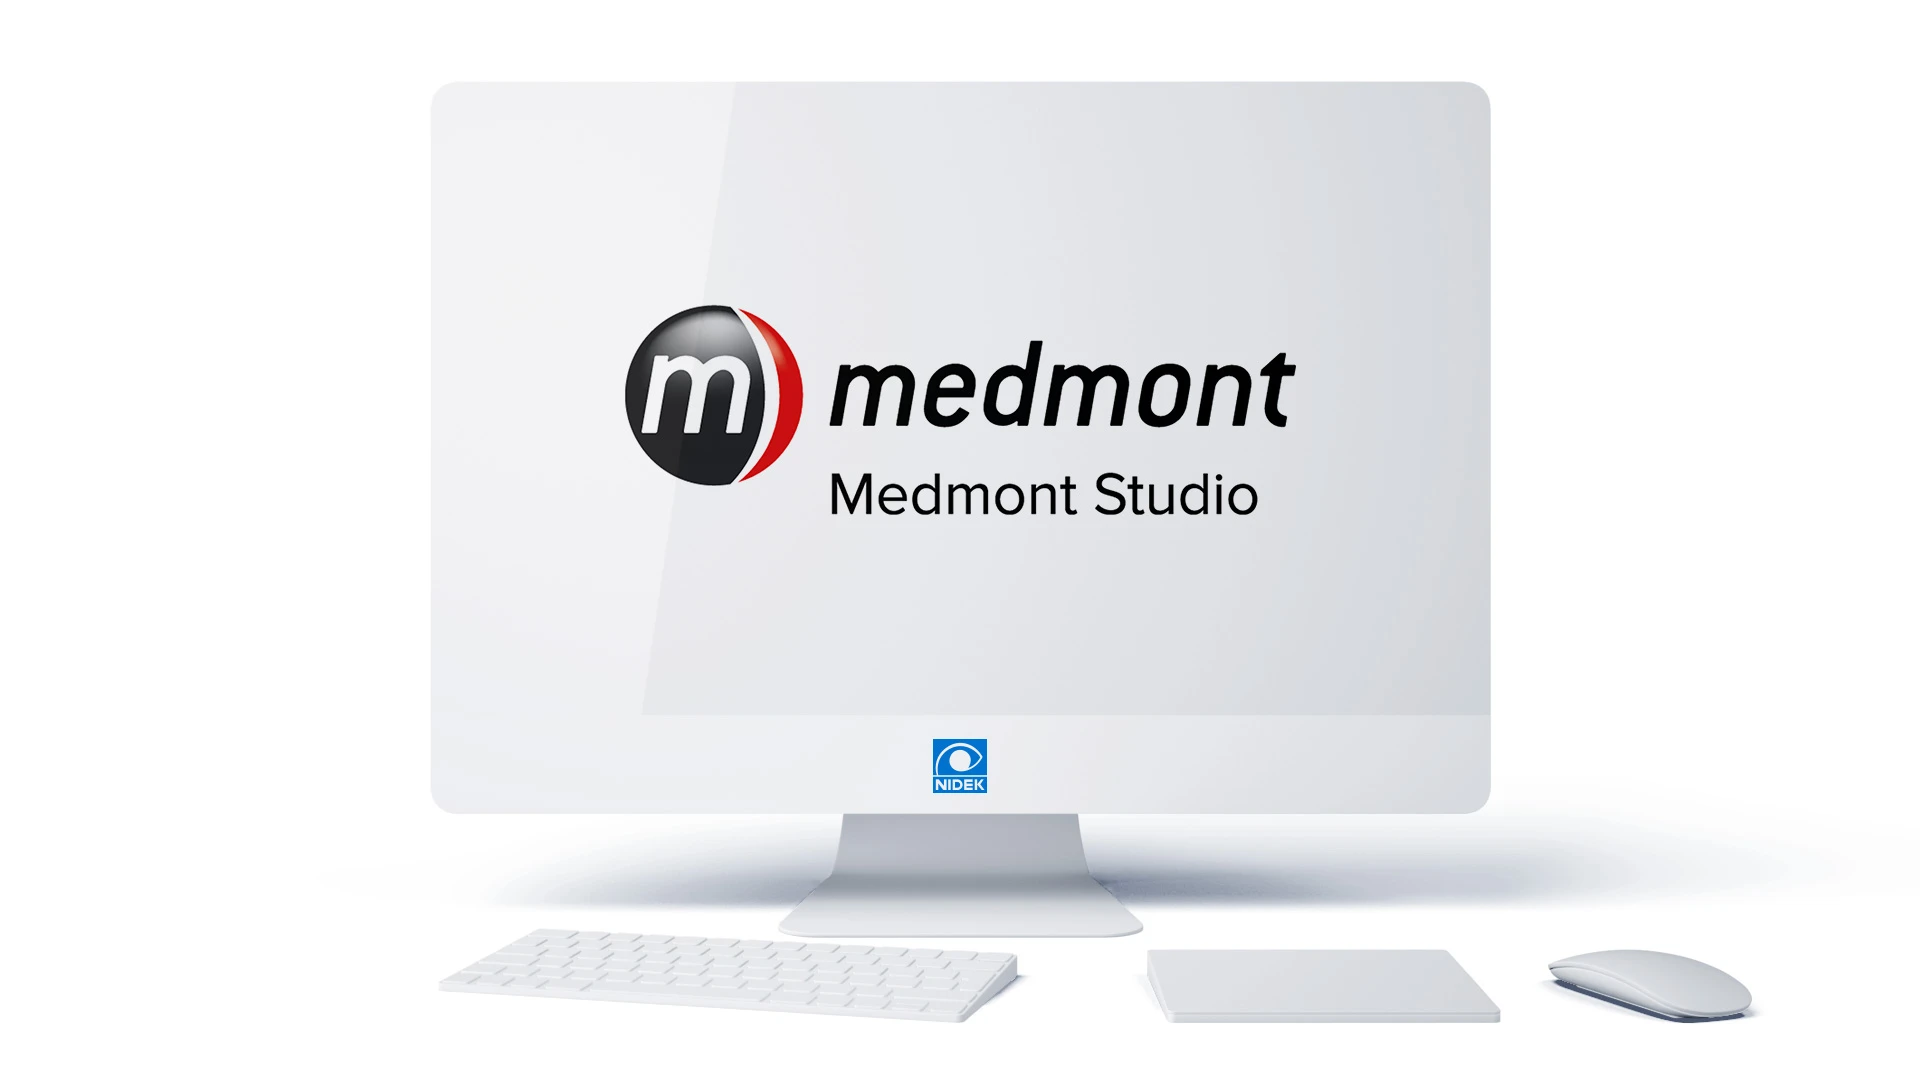 An All-In-One Computer Featuring A White Keyboard, Mouse, And Touchpad. The Screen Prominently Displays The &Quot;Medmont Medmont Studio&Quot; Logo With A Stylized &Quot;M&Quot; Inside A Black Circle, While The Nidek Logo Is Subtly Visible On The Monitor'S Lower Bezel. The Background Is Clean And White.